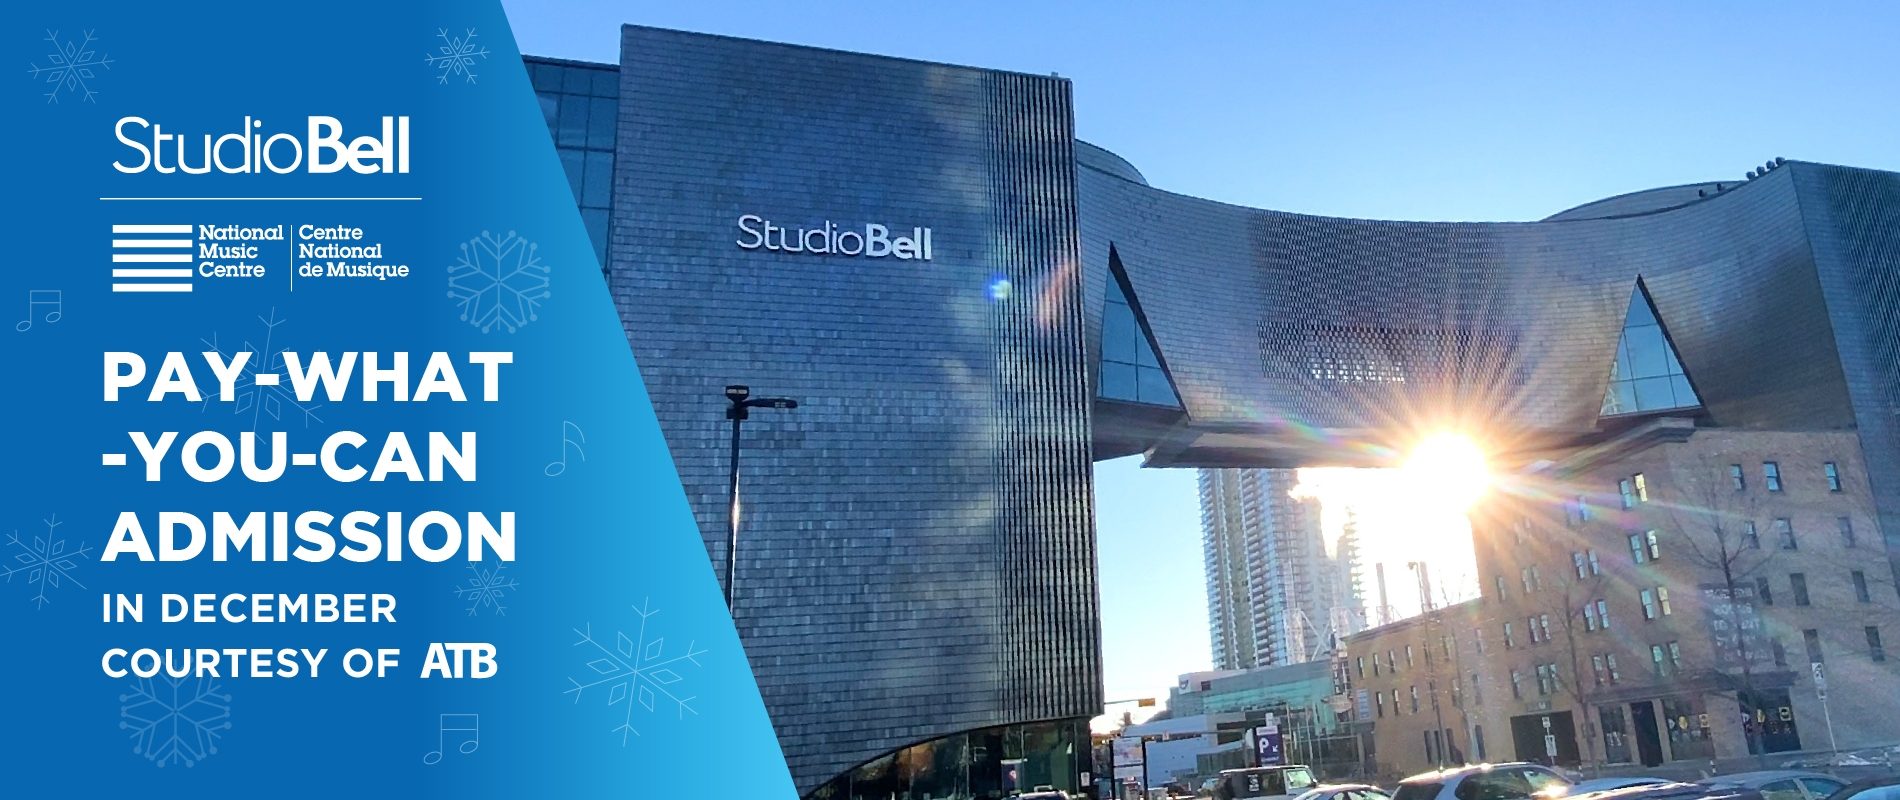 National Music Centre Offers Pay-What-You-Can Admission to Studio Bell Courtesy of ATB for December